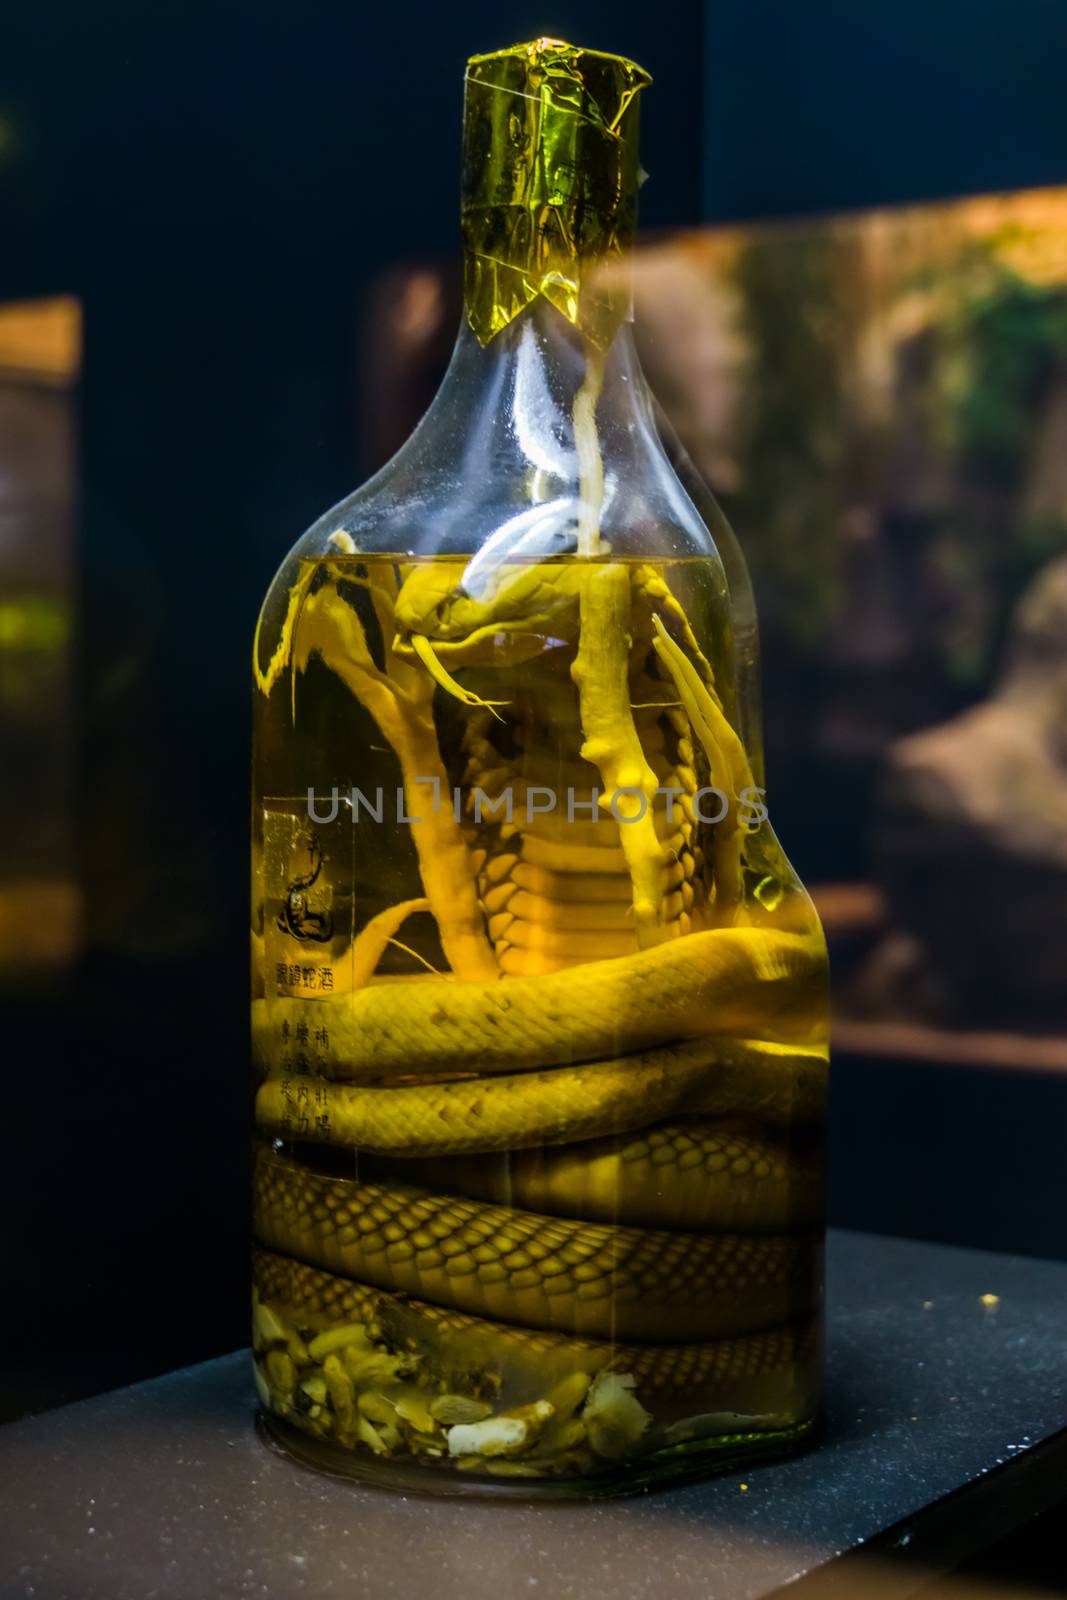 preserved snake in a bottle, educative objects for herpetology, creepy home decorations by charlottebleijenberg